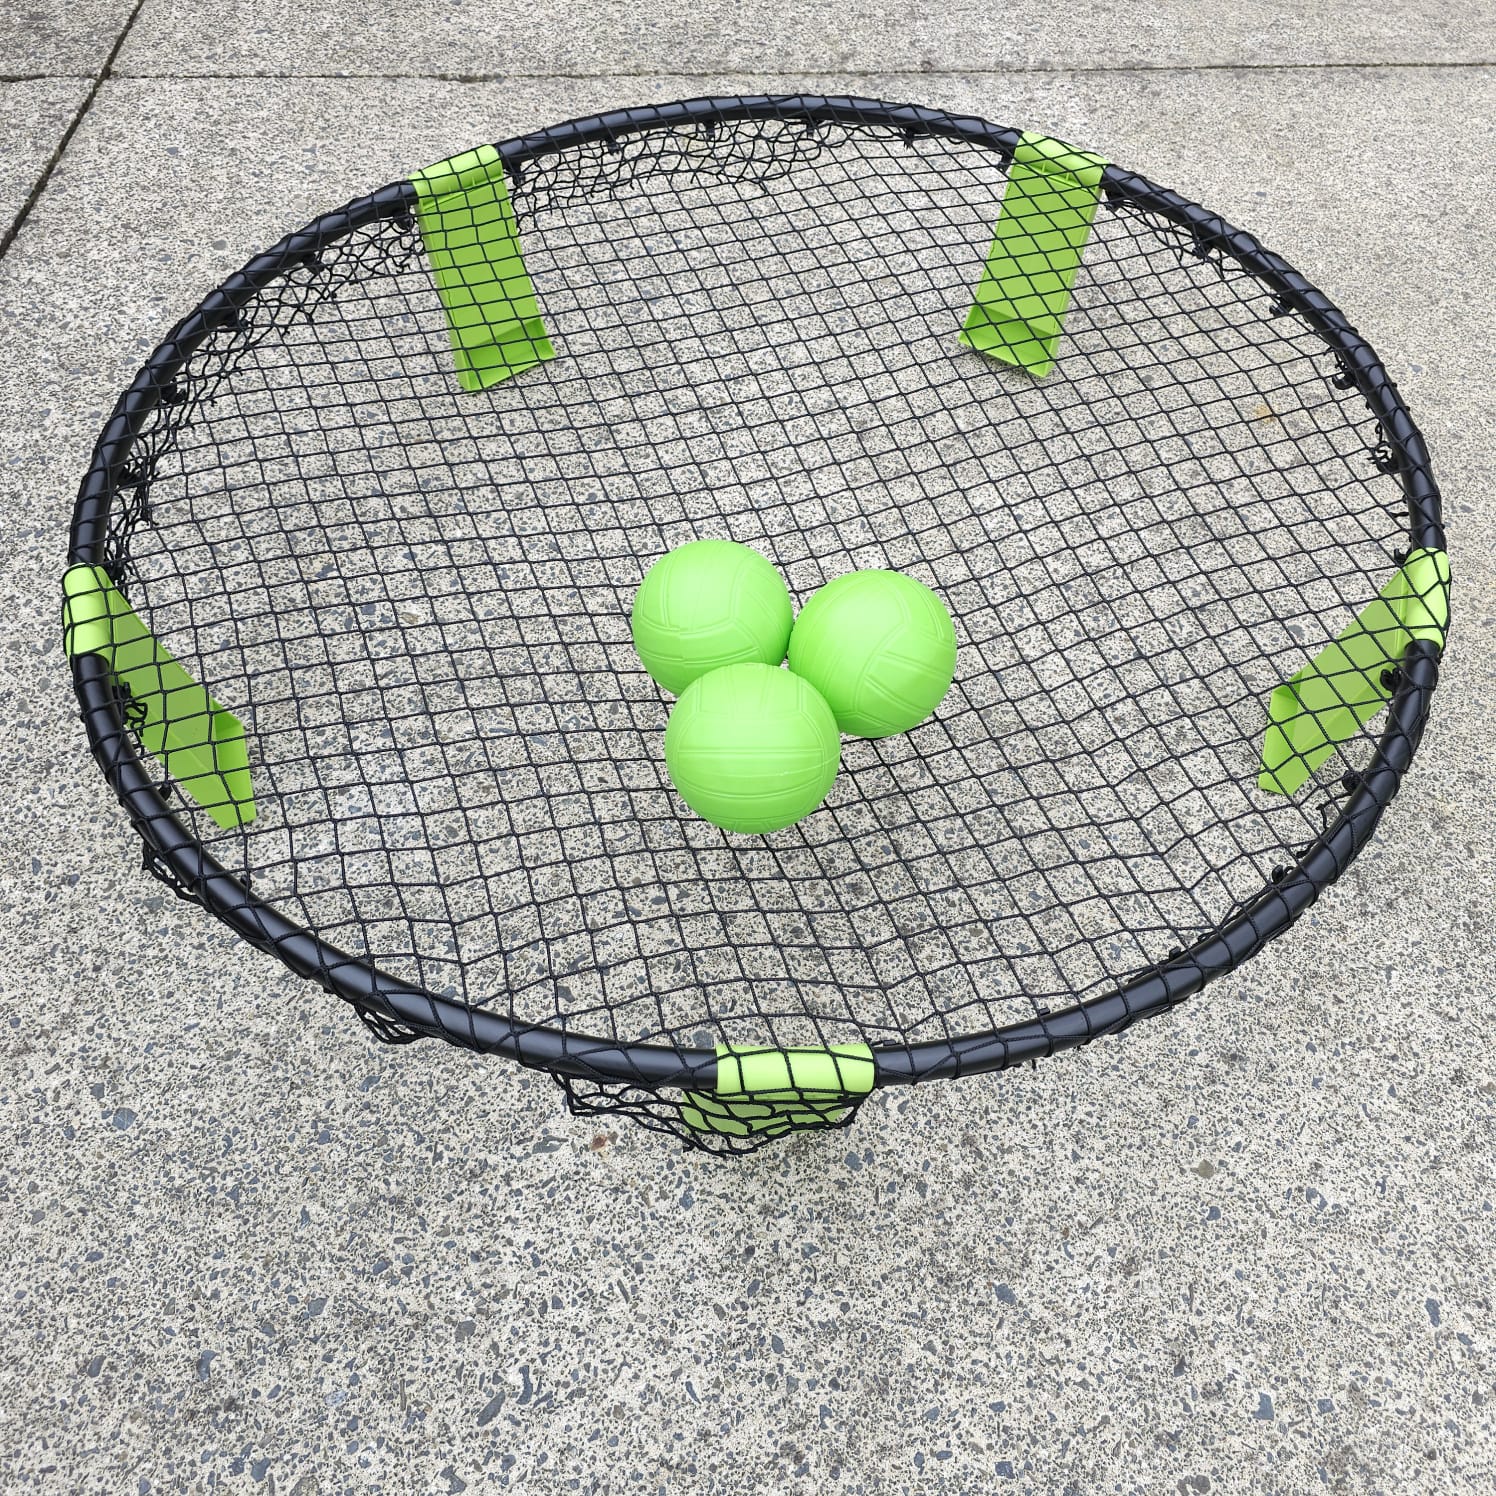 Spikeball Pro Kit - level up your game